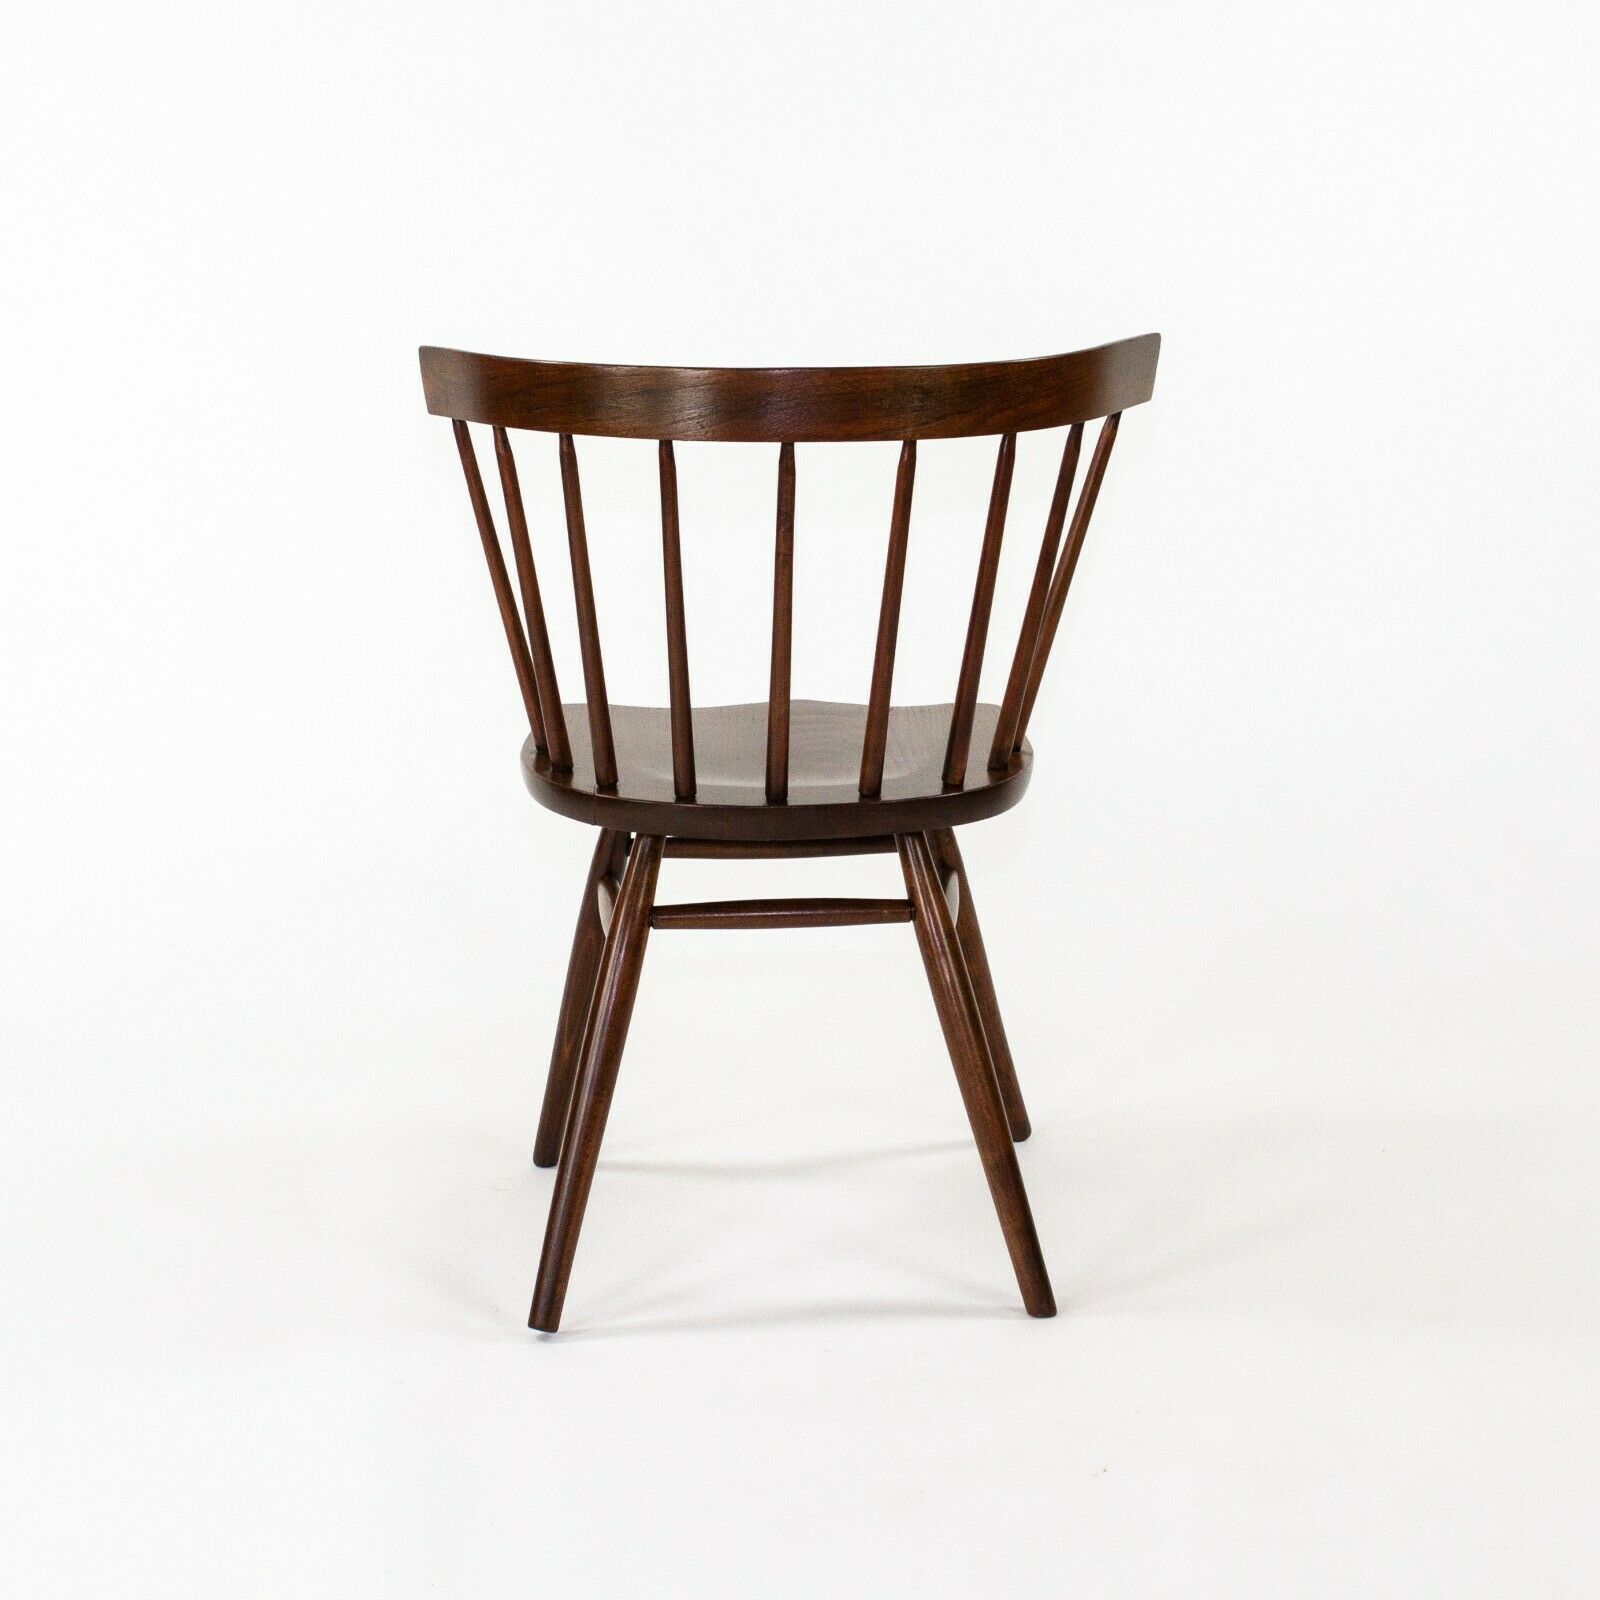 SOLD 1947 Pair of George Nakashima for Knoll Associates N19 Straight Chairs in Walnut